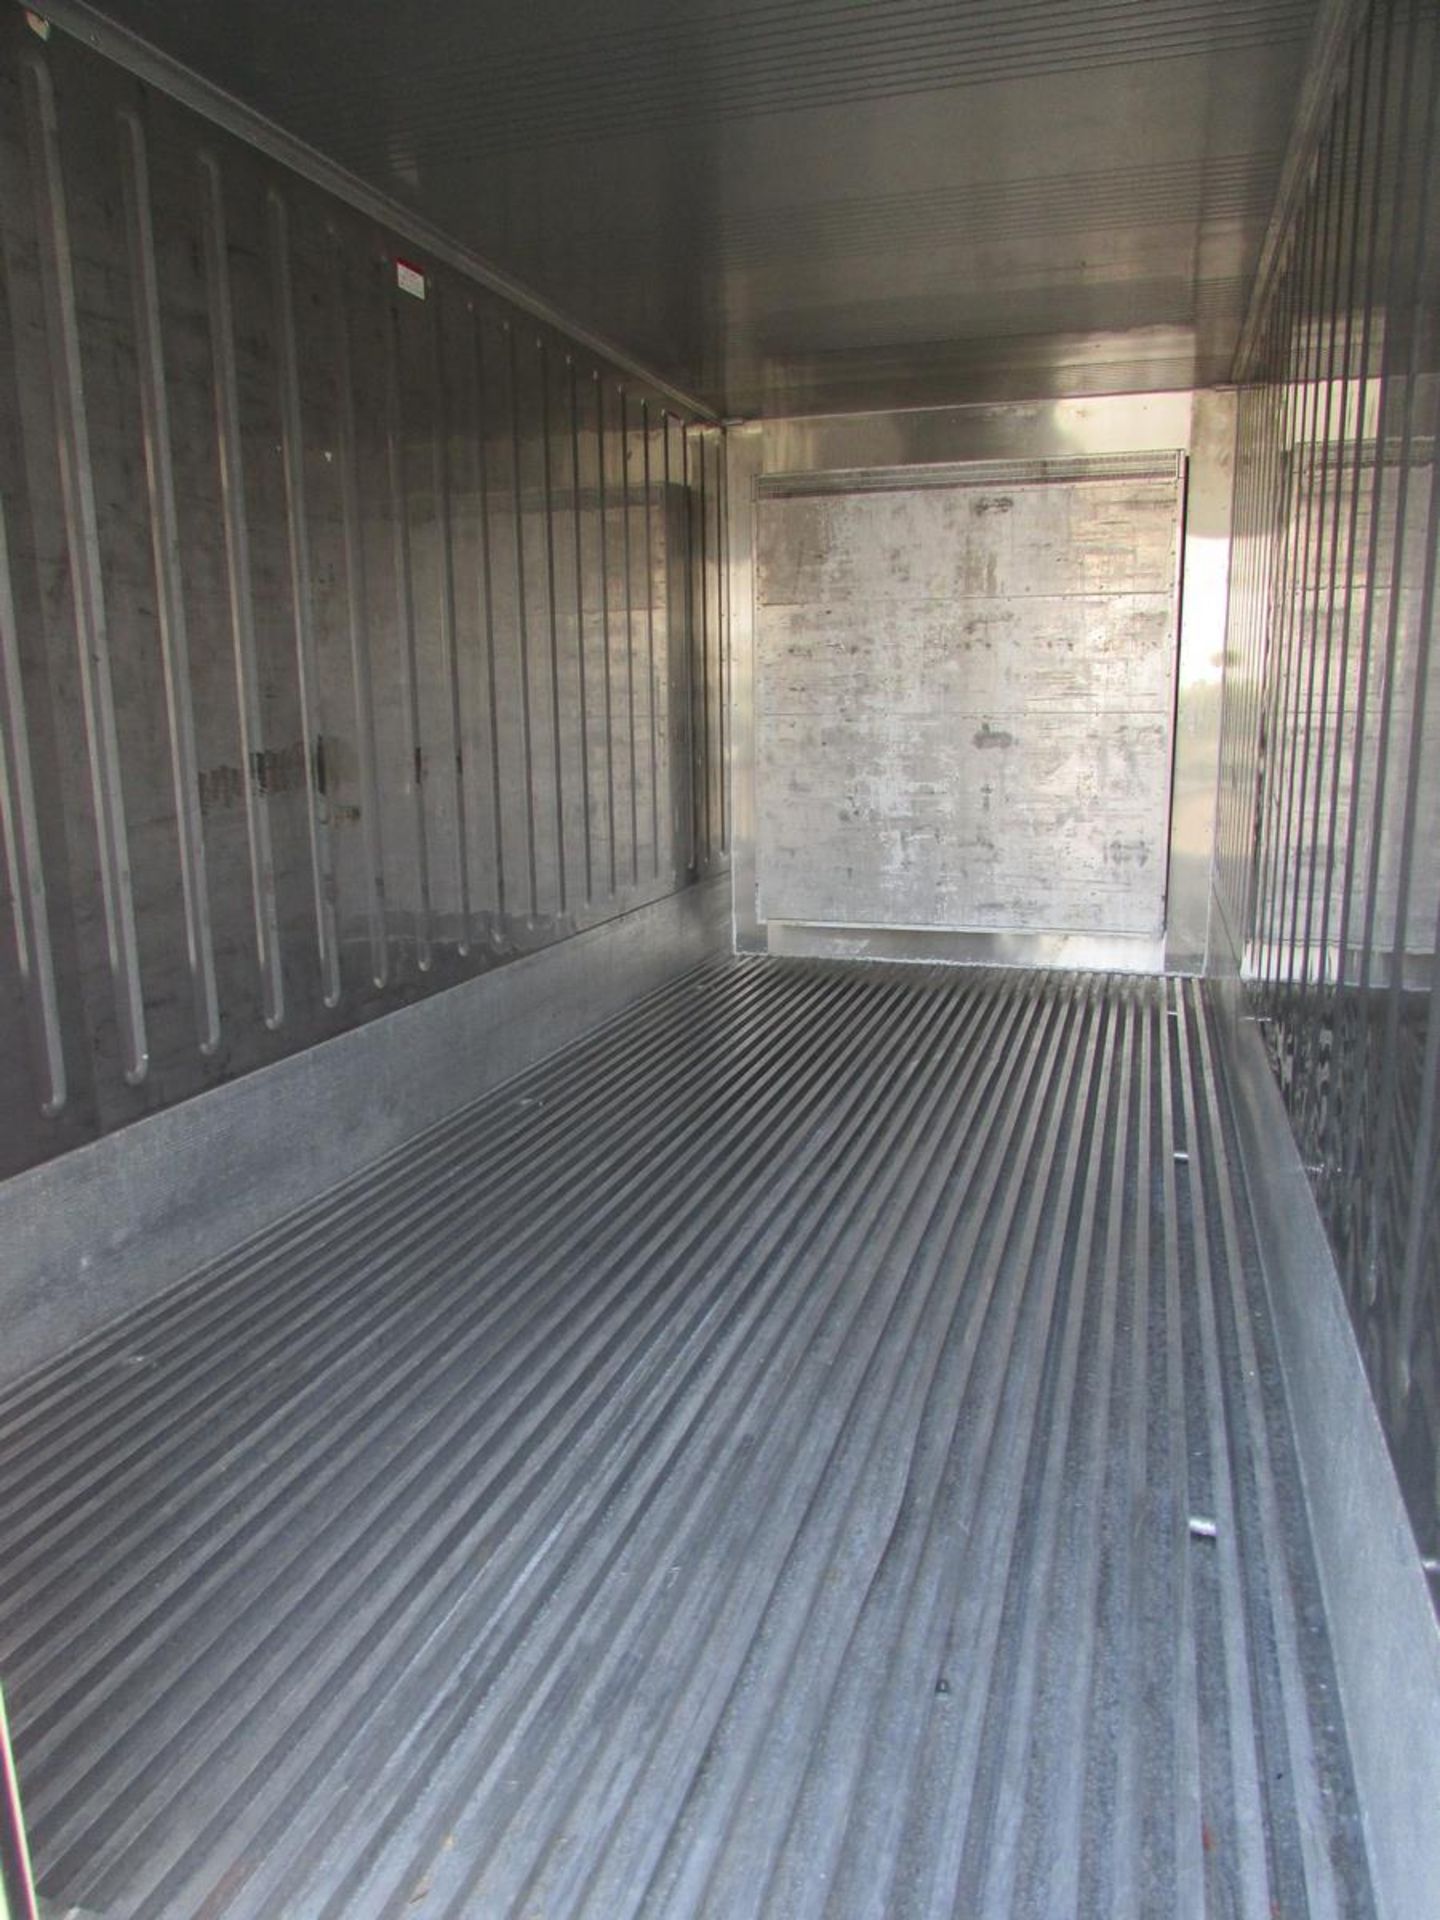 Martin 20' Dry Refrigerated Shipping Container (2006) - Image 21 of 22